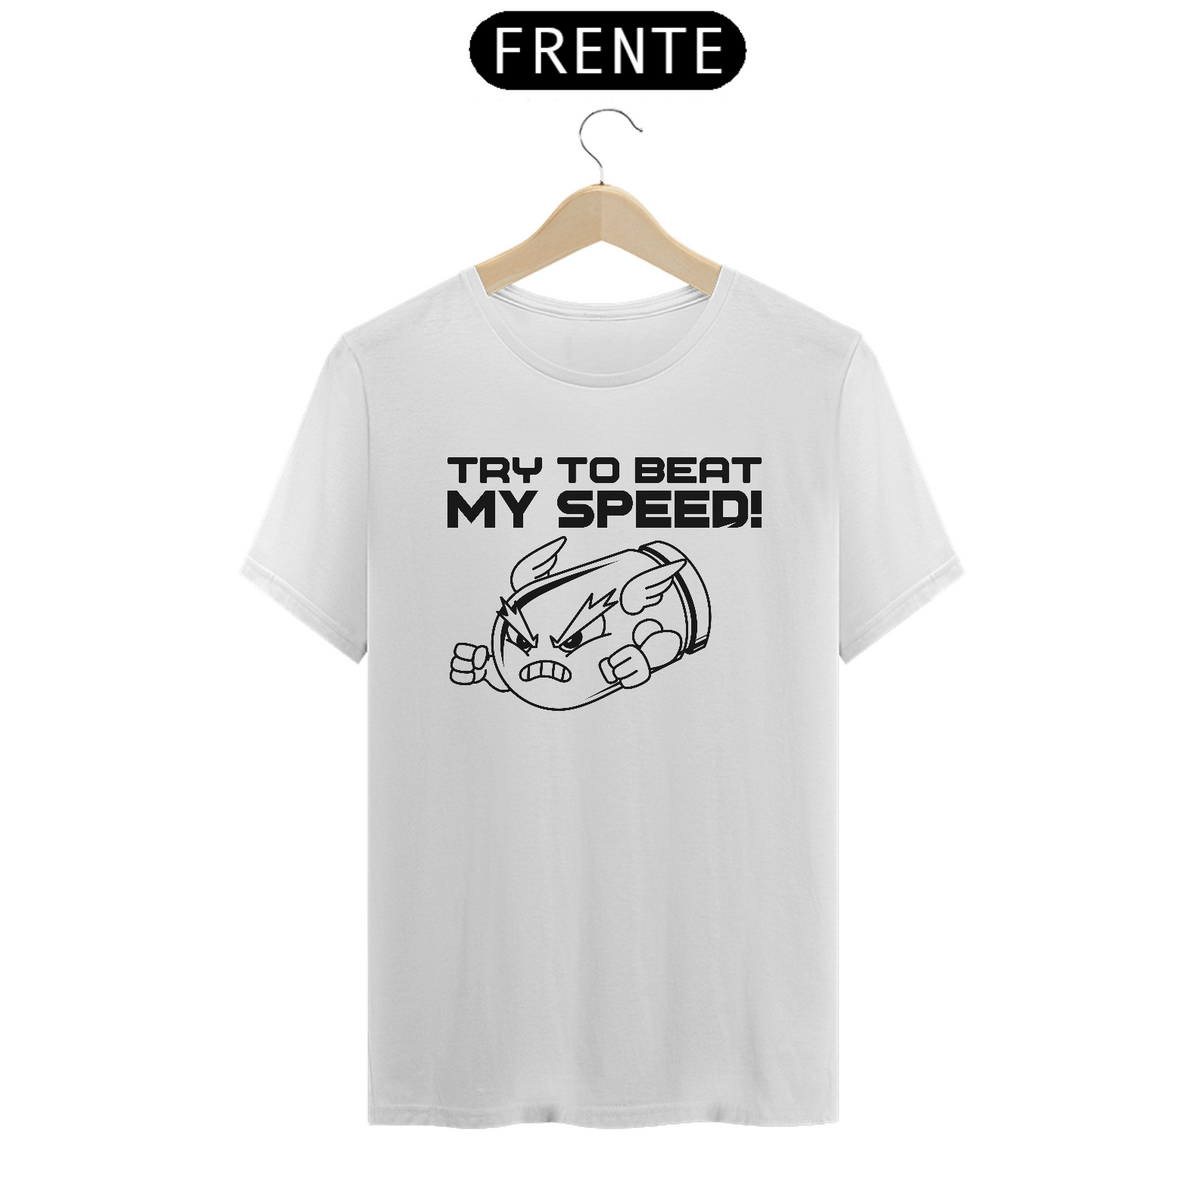 Nome do produto: Camisa | Try to beat my speed